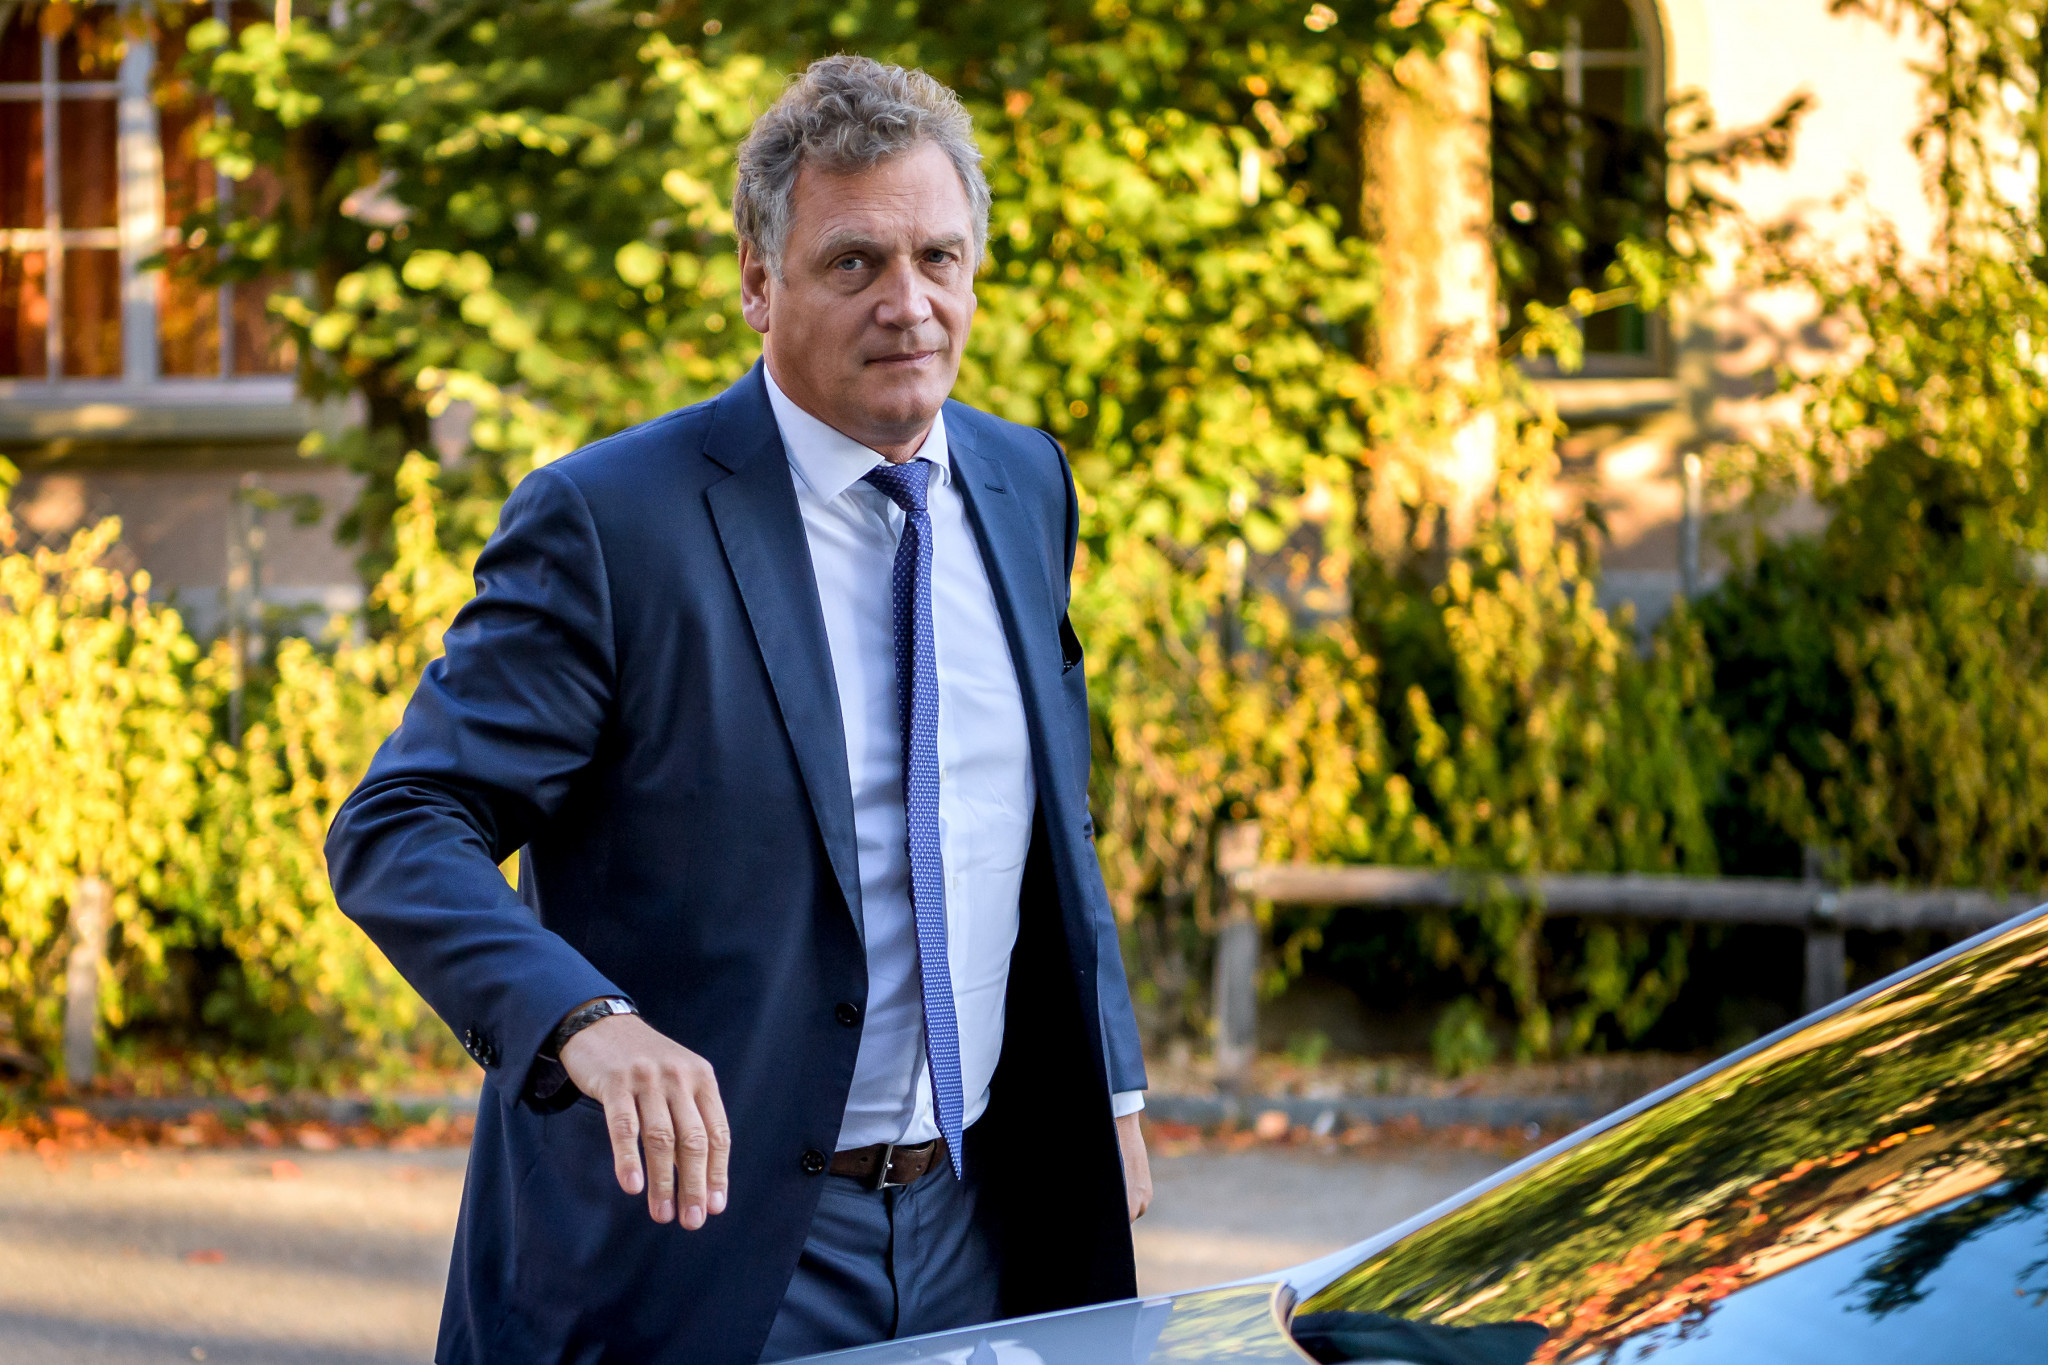 Jérôme Valcke was found to have committed numerous ethics violations ©Getty Images